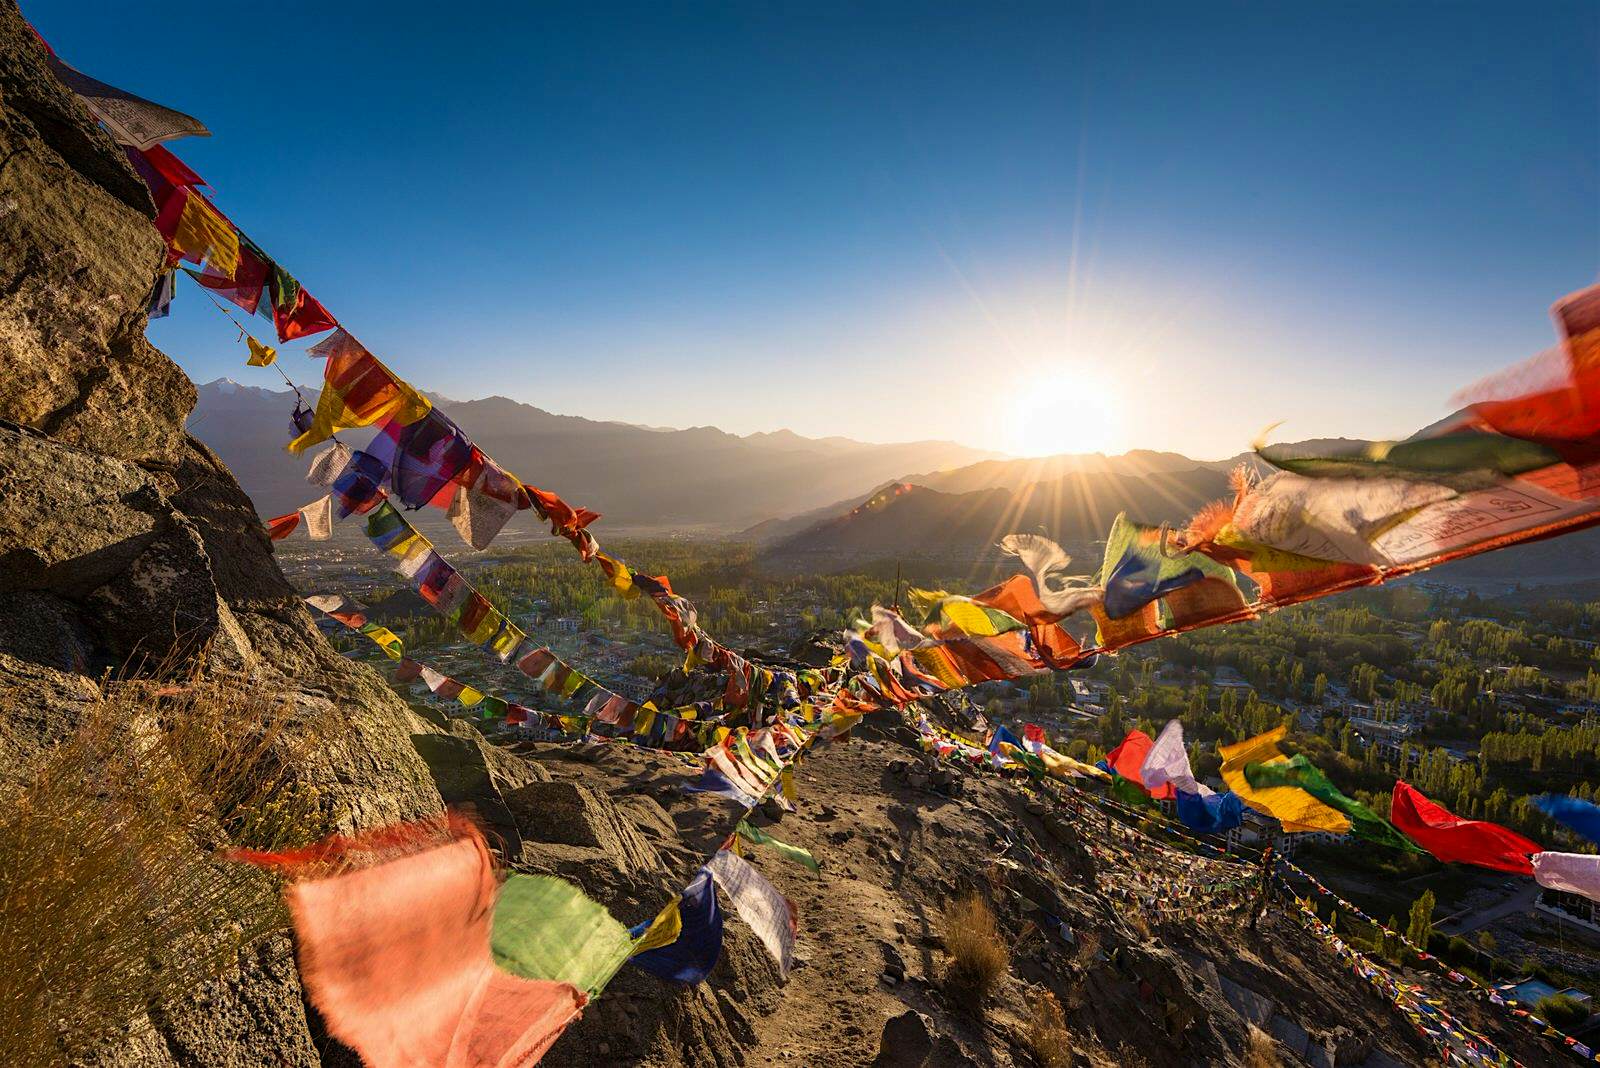 Prayer flags blowing in the wind at sunrise above the town of Leh in Ladakh, India